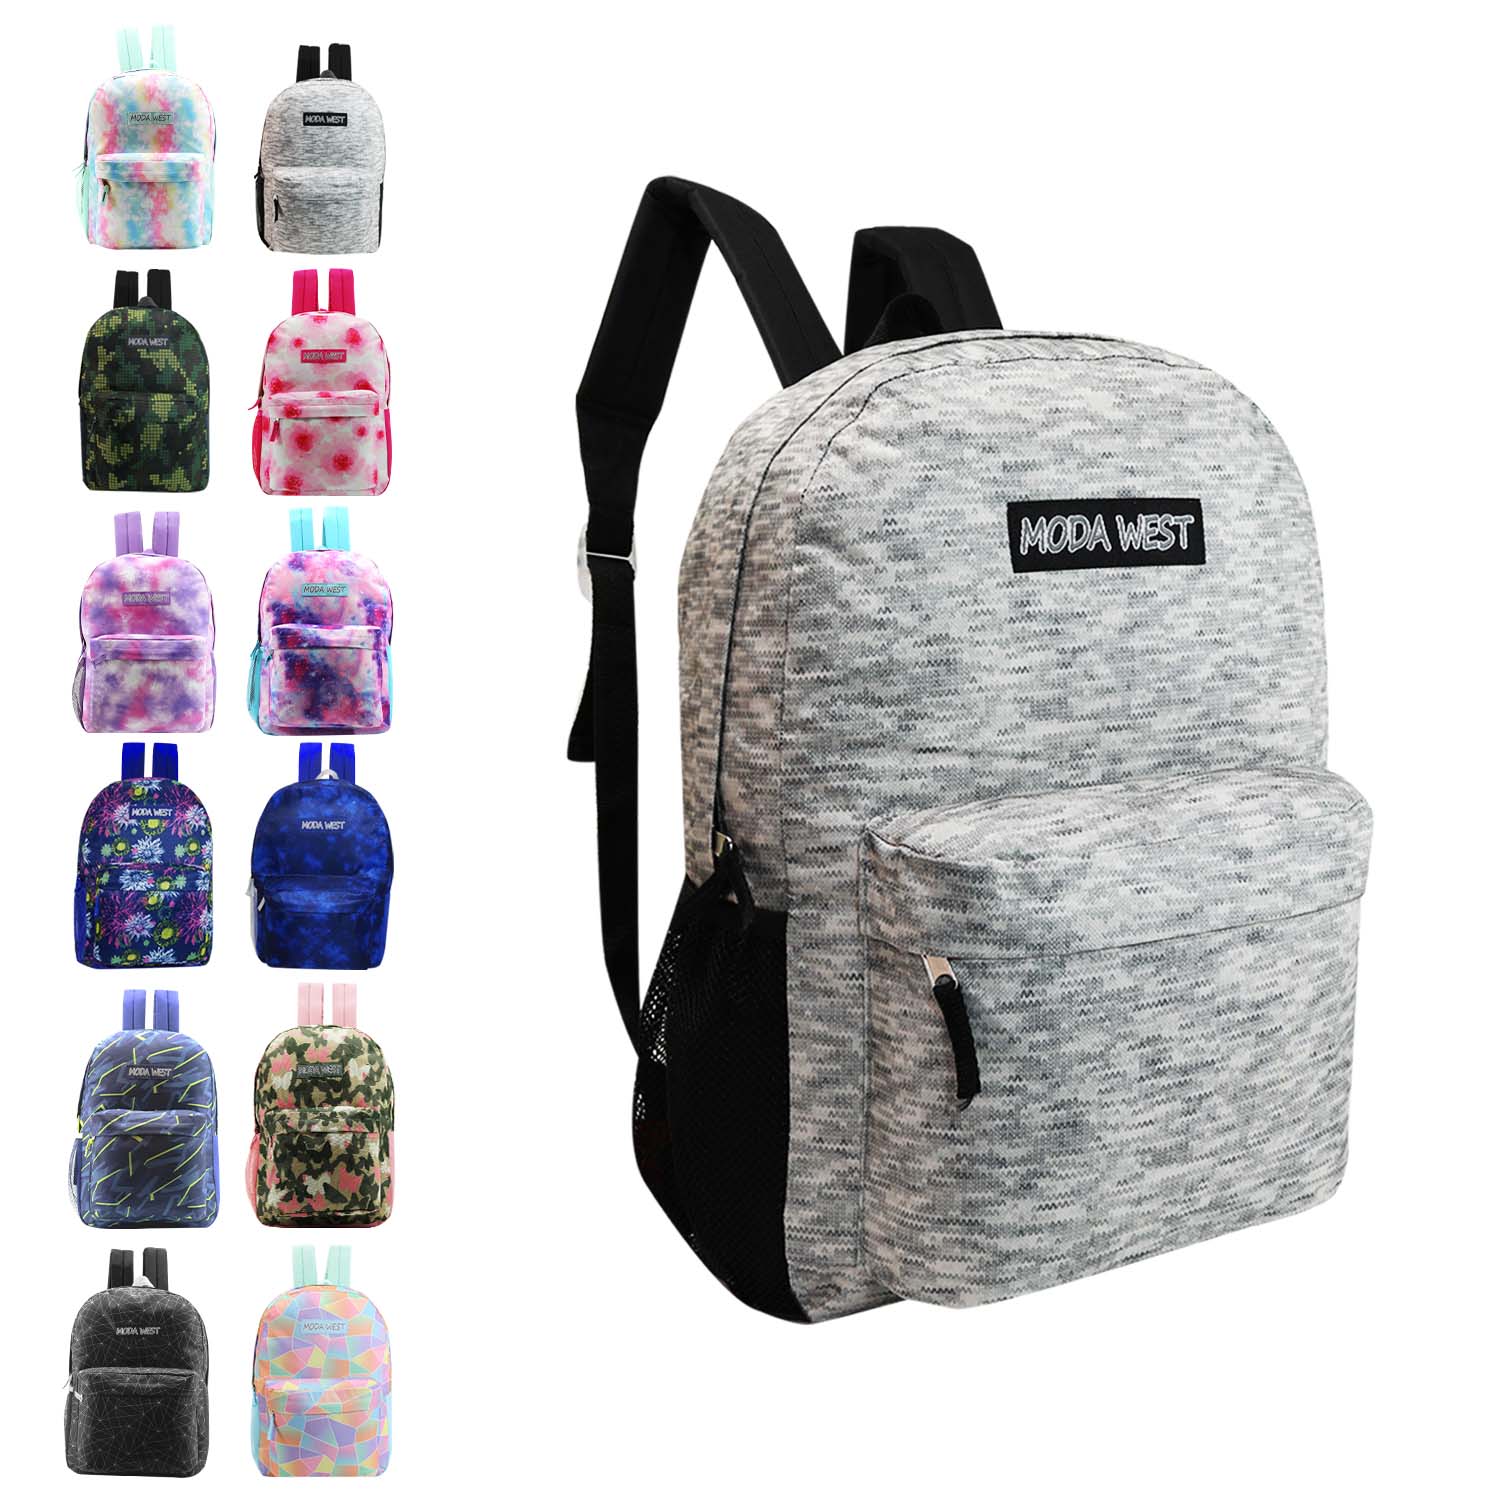 ''17'''' Lightweight Classic Style Printed BACKPACKs w/ Adjustable Padded Straps - Heathered, Tie-Dye, 